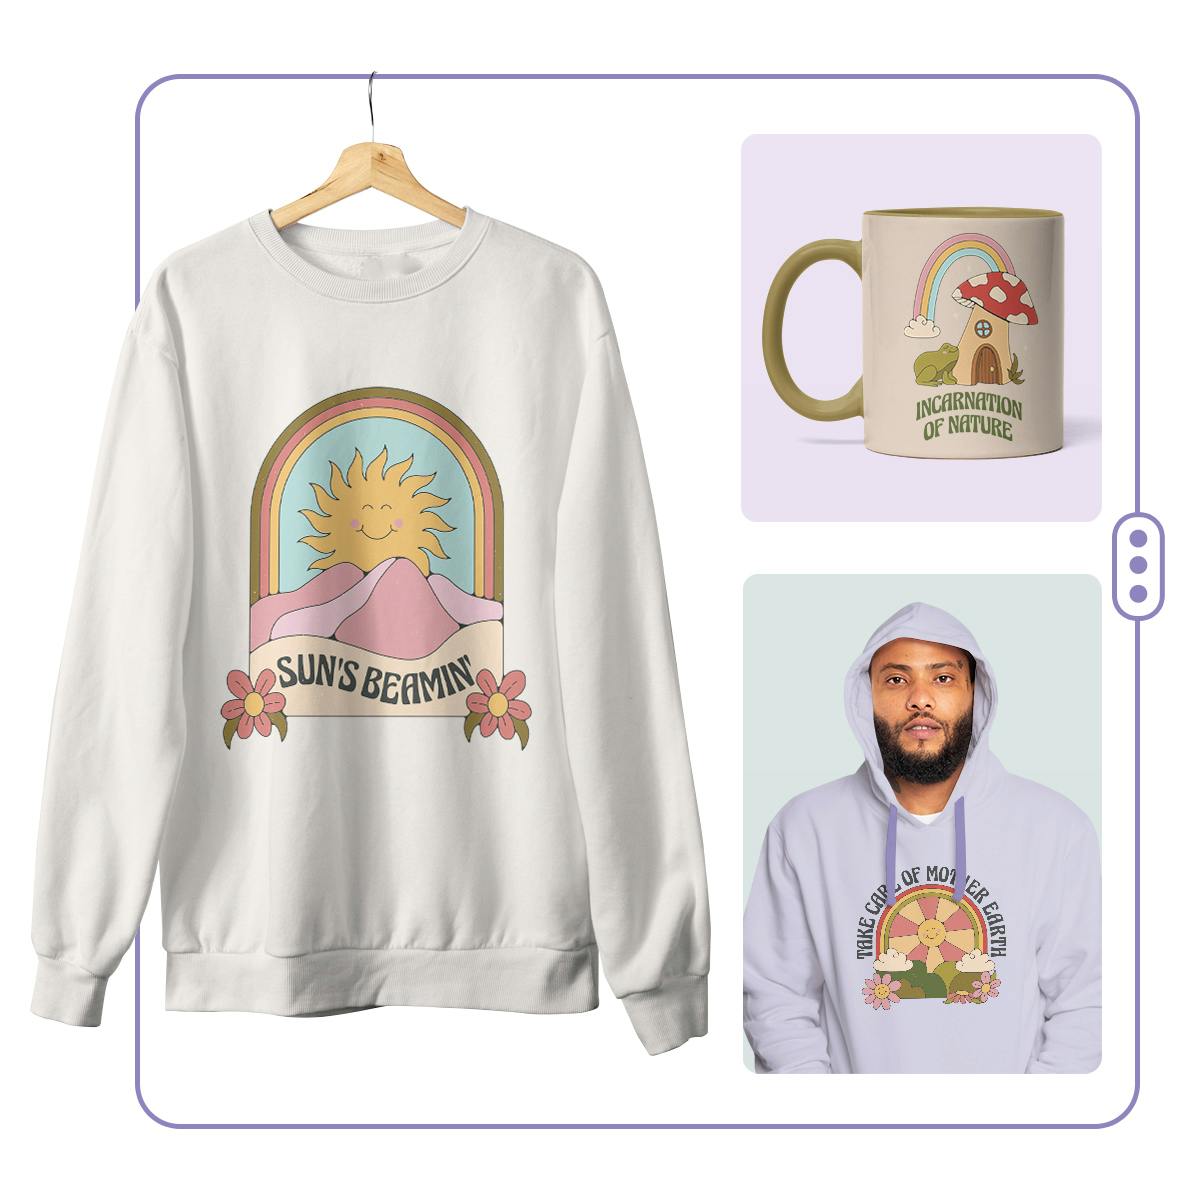 different merch products